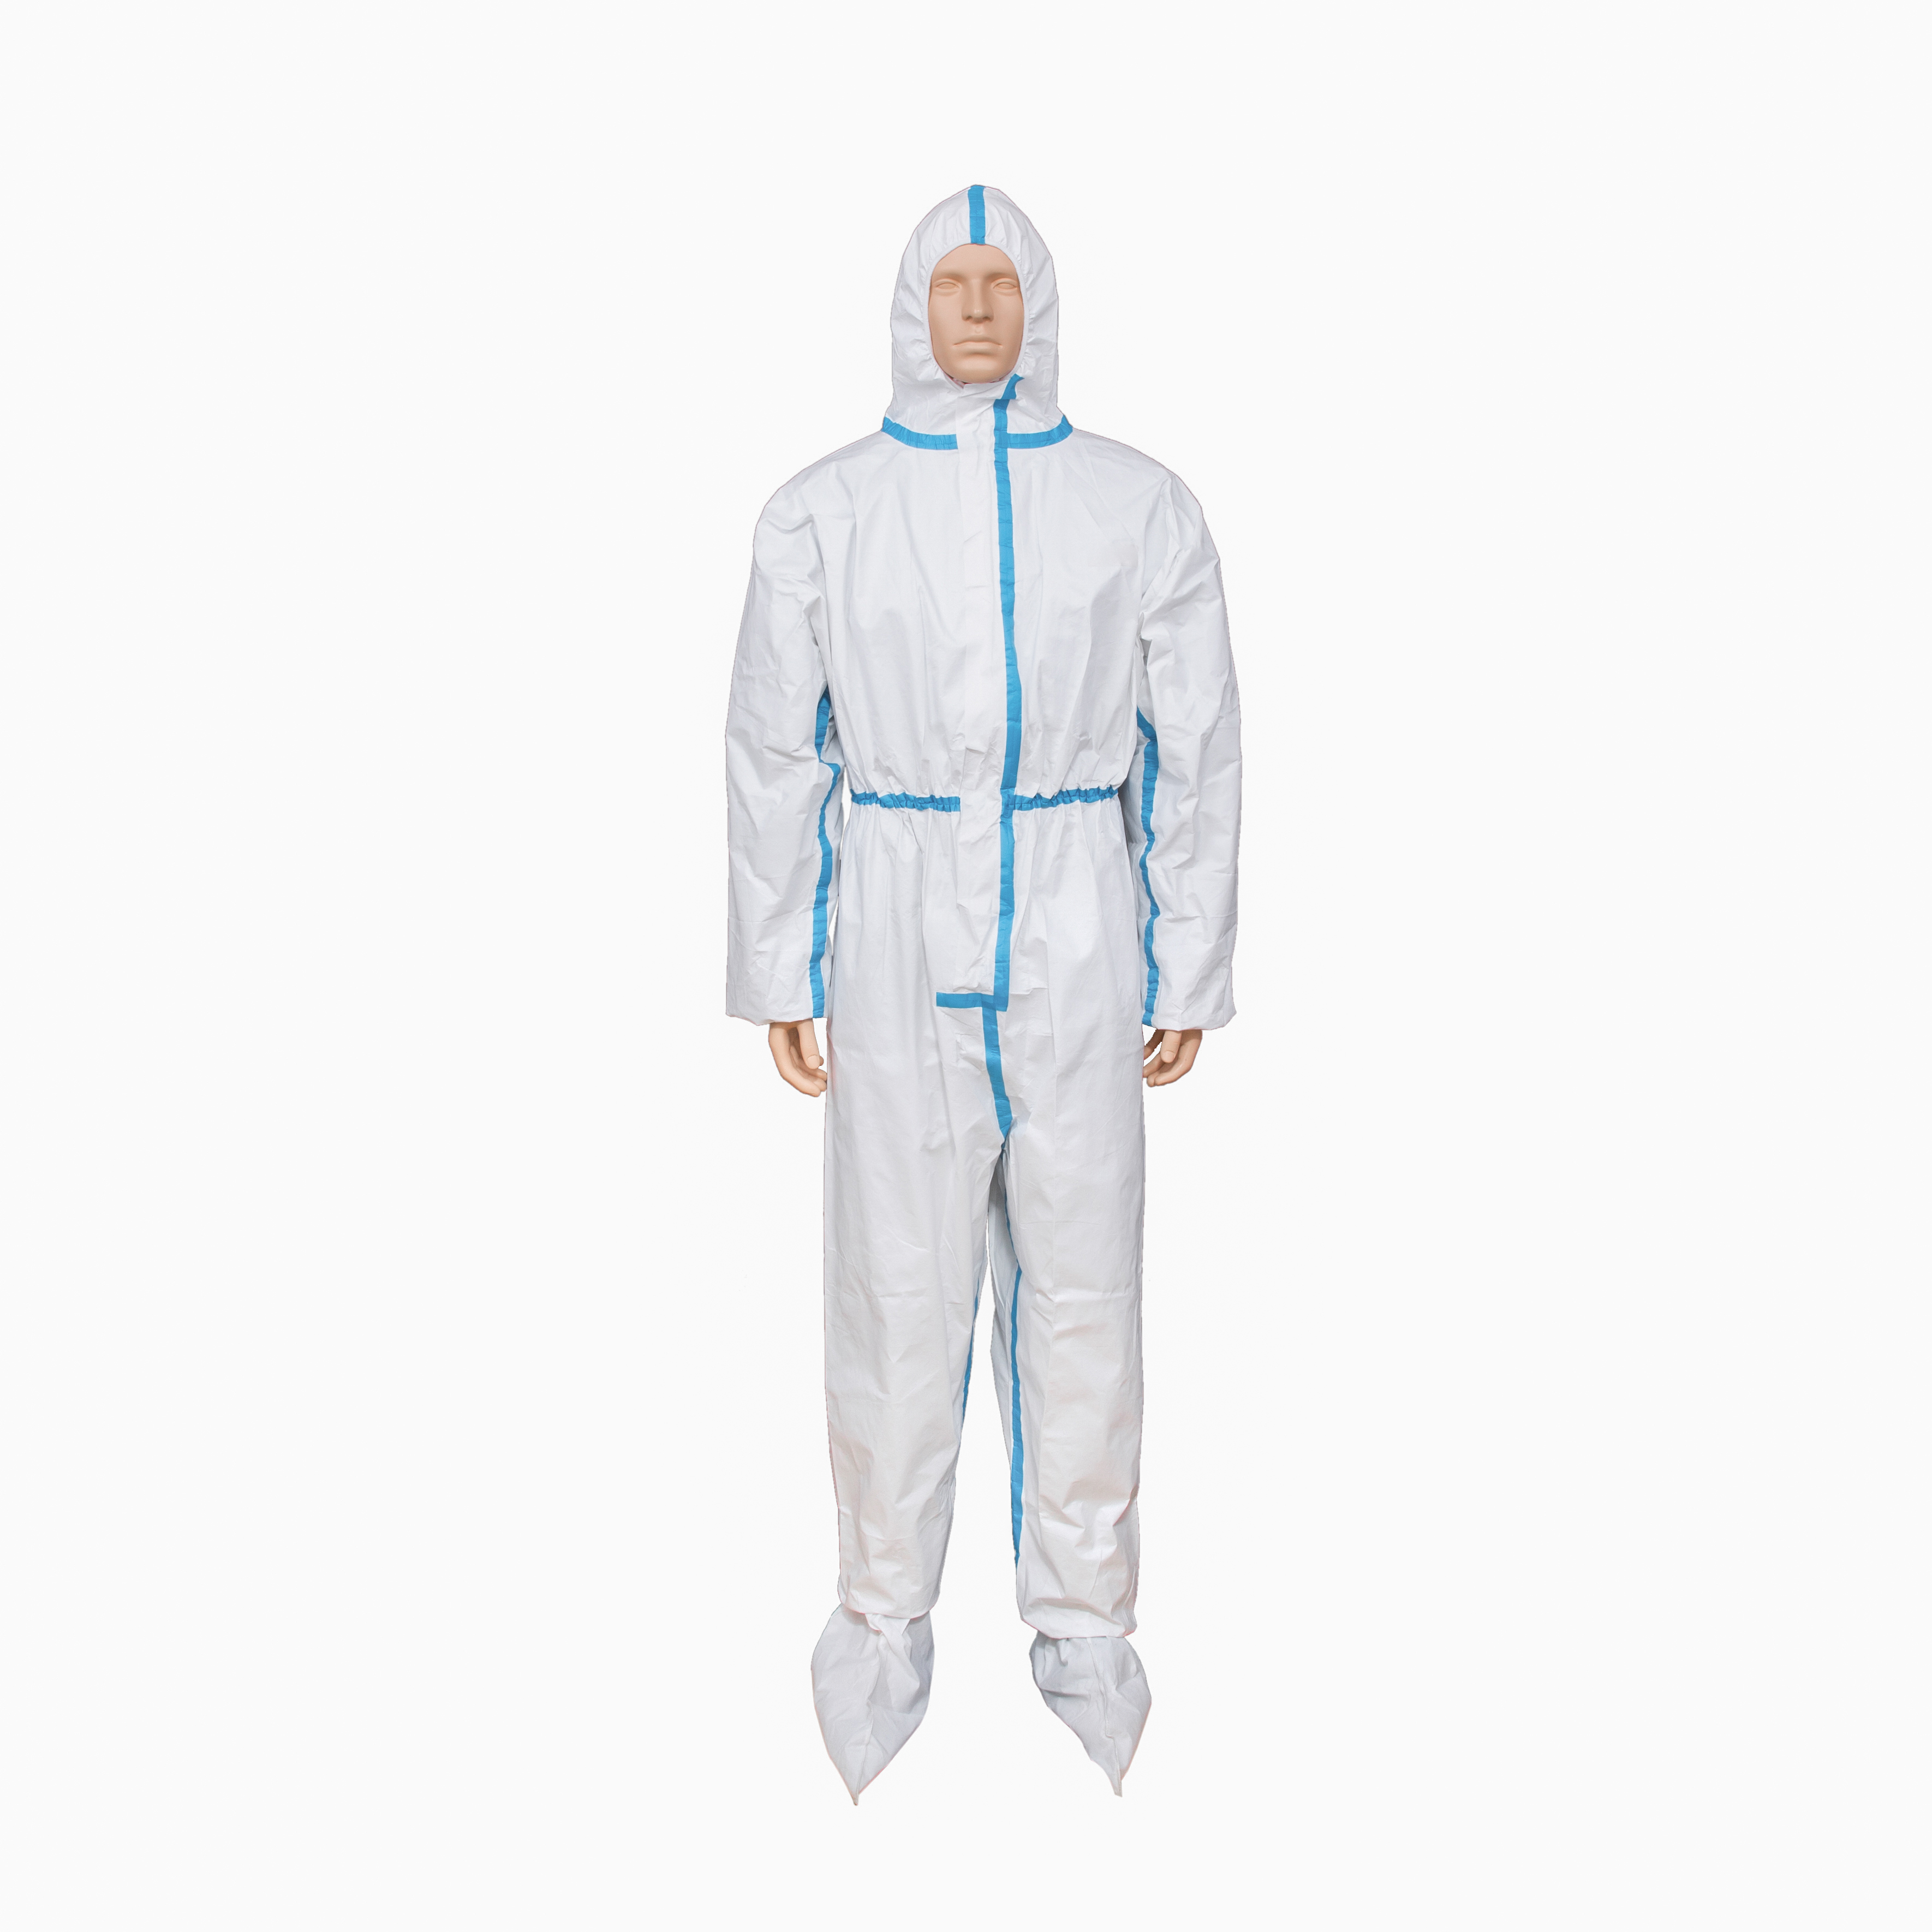 Medical protective Clothing